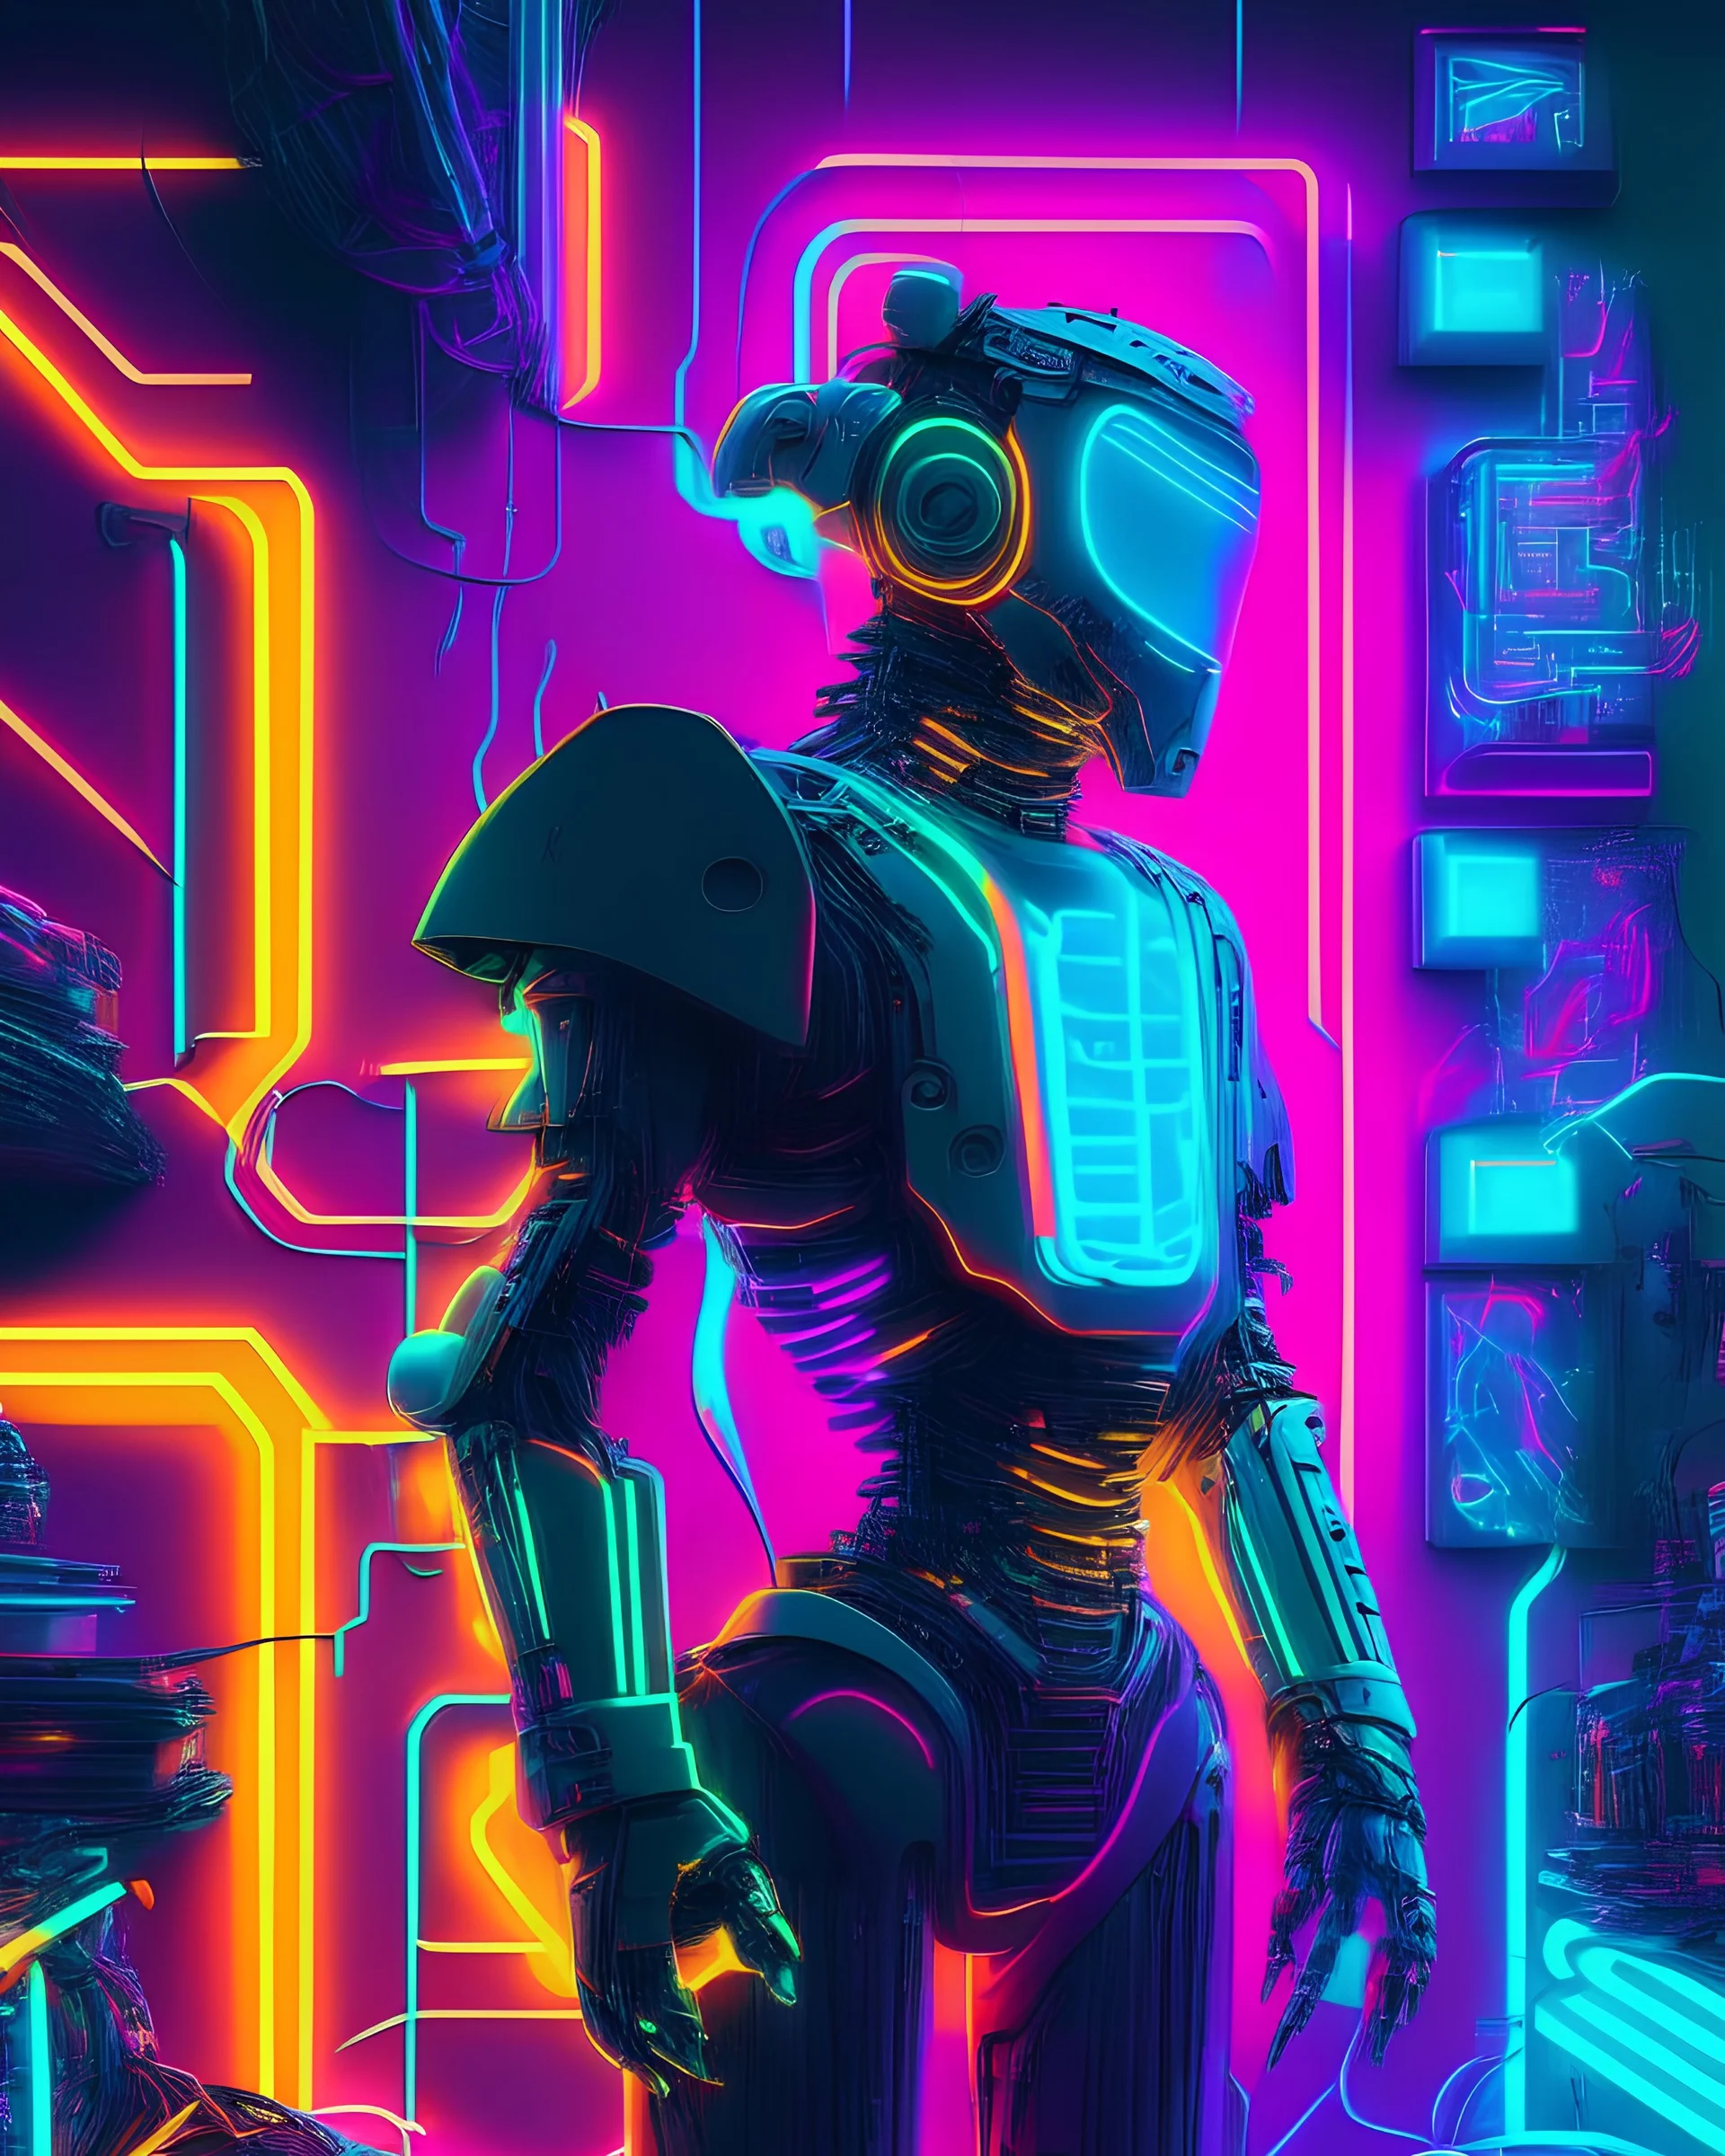 The image of neon style, with the presence of a powerful robot and neural circuits full of fascination, creates a space that showcases the advancement of artificial intelligence. The combination of neon colors and AI elements conveys a sense of energy and power that is displayed clearly